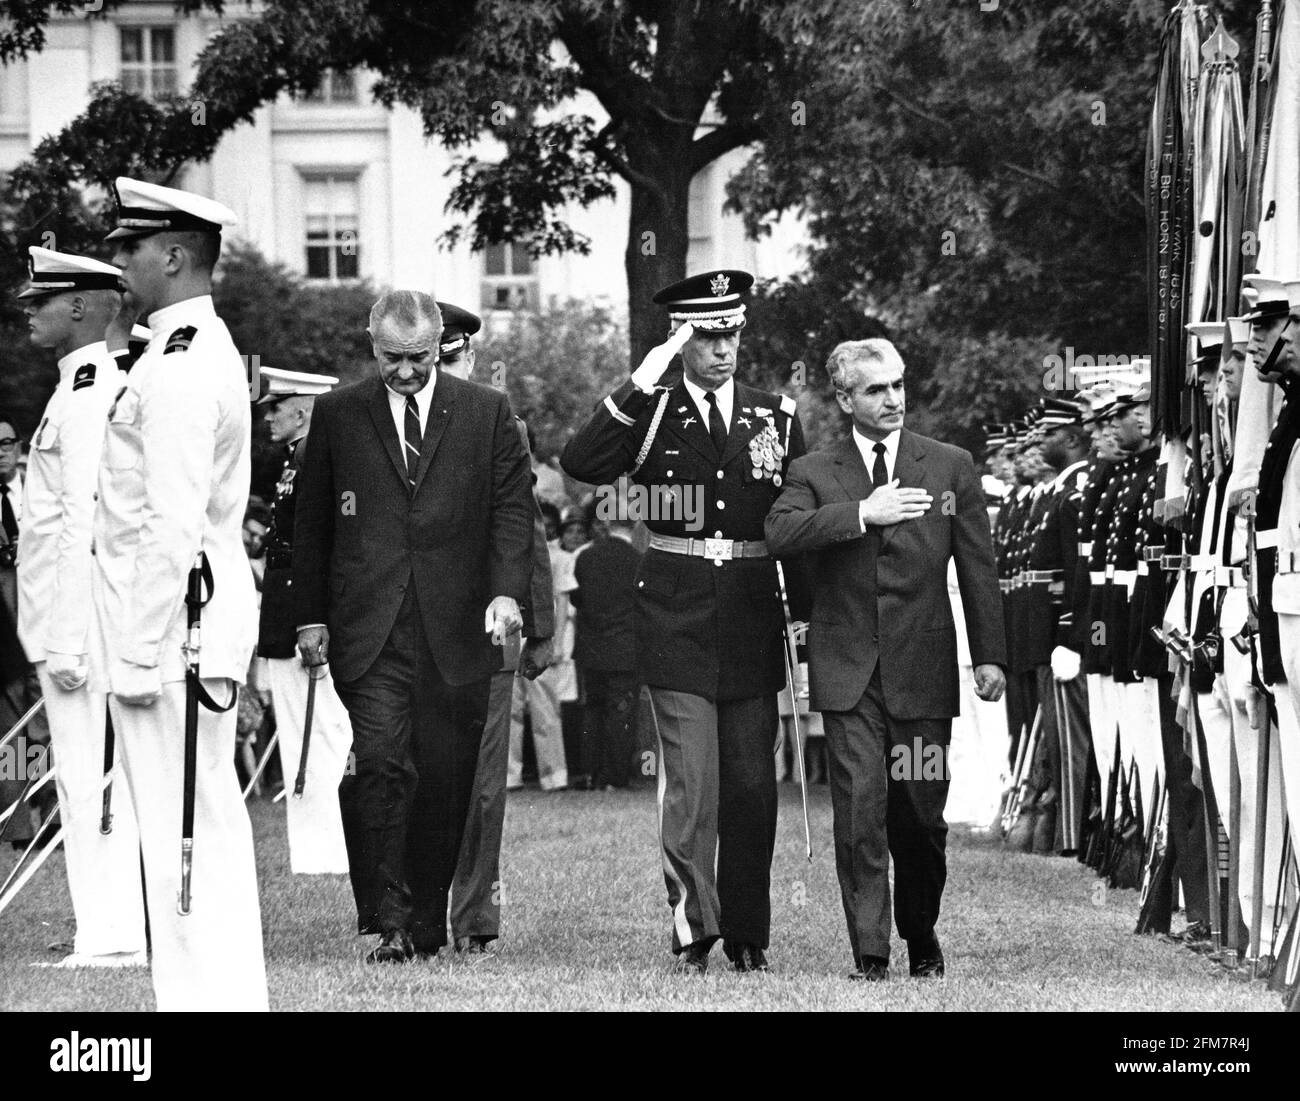 United States President Lyndon B. Johnson, left, and Commander of the Troops, US Army Colonel Joseph Conmy, Jr., center, escort Mohammad Reza Pahlavi, the Shah of Iran, right, troop the line during a full honor arrival ceremony on the South Lawn of the White House in Washington, DC on August 22, 1967. The Shah is in Washington for an informal visit.Credit: Arnie Sachs/CNP | usage worldwide Stock Photo